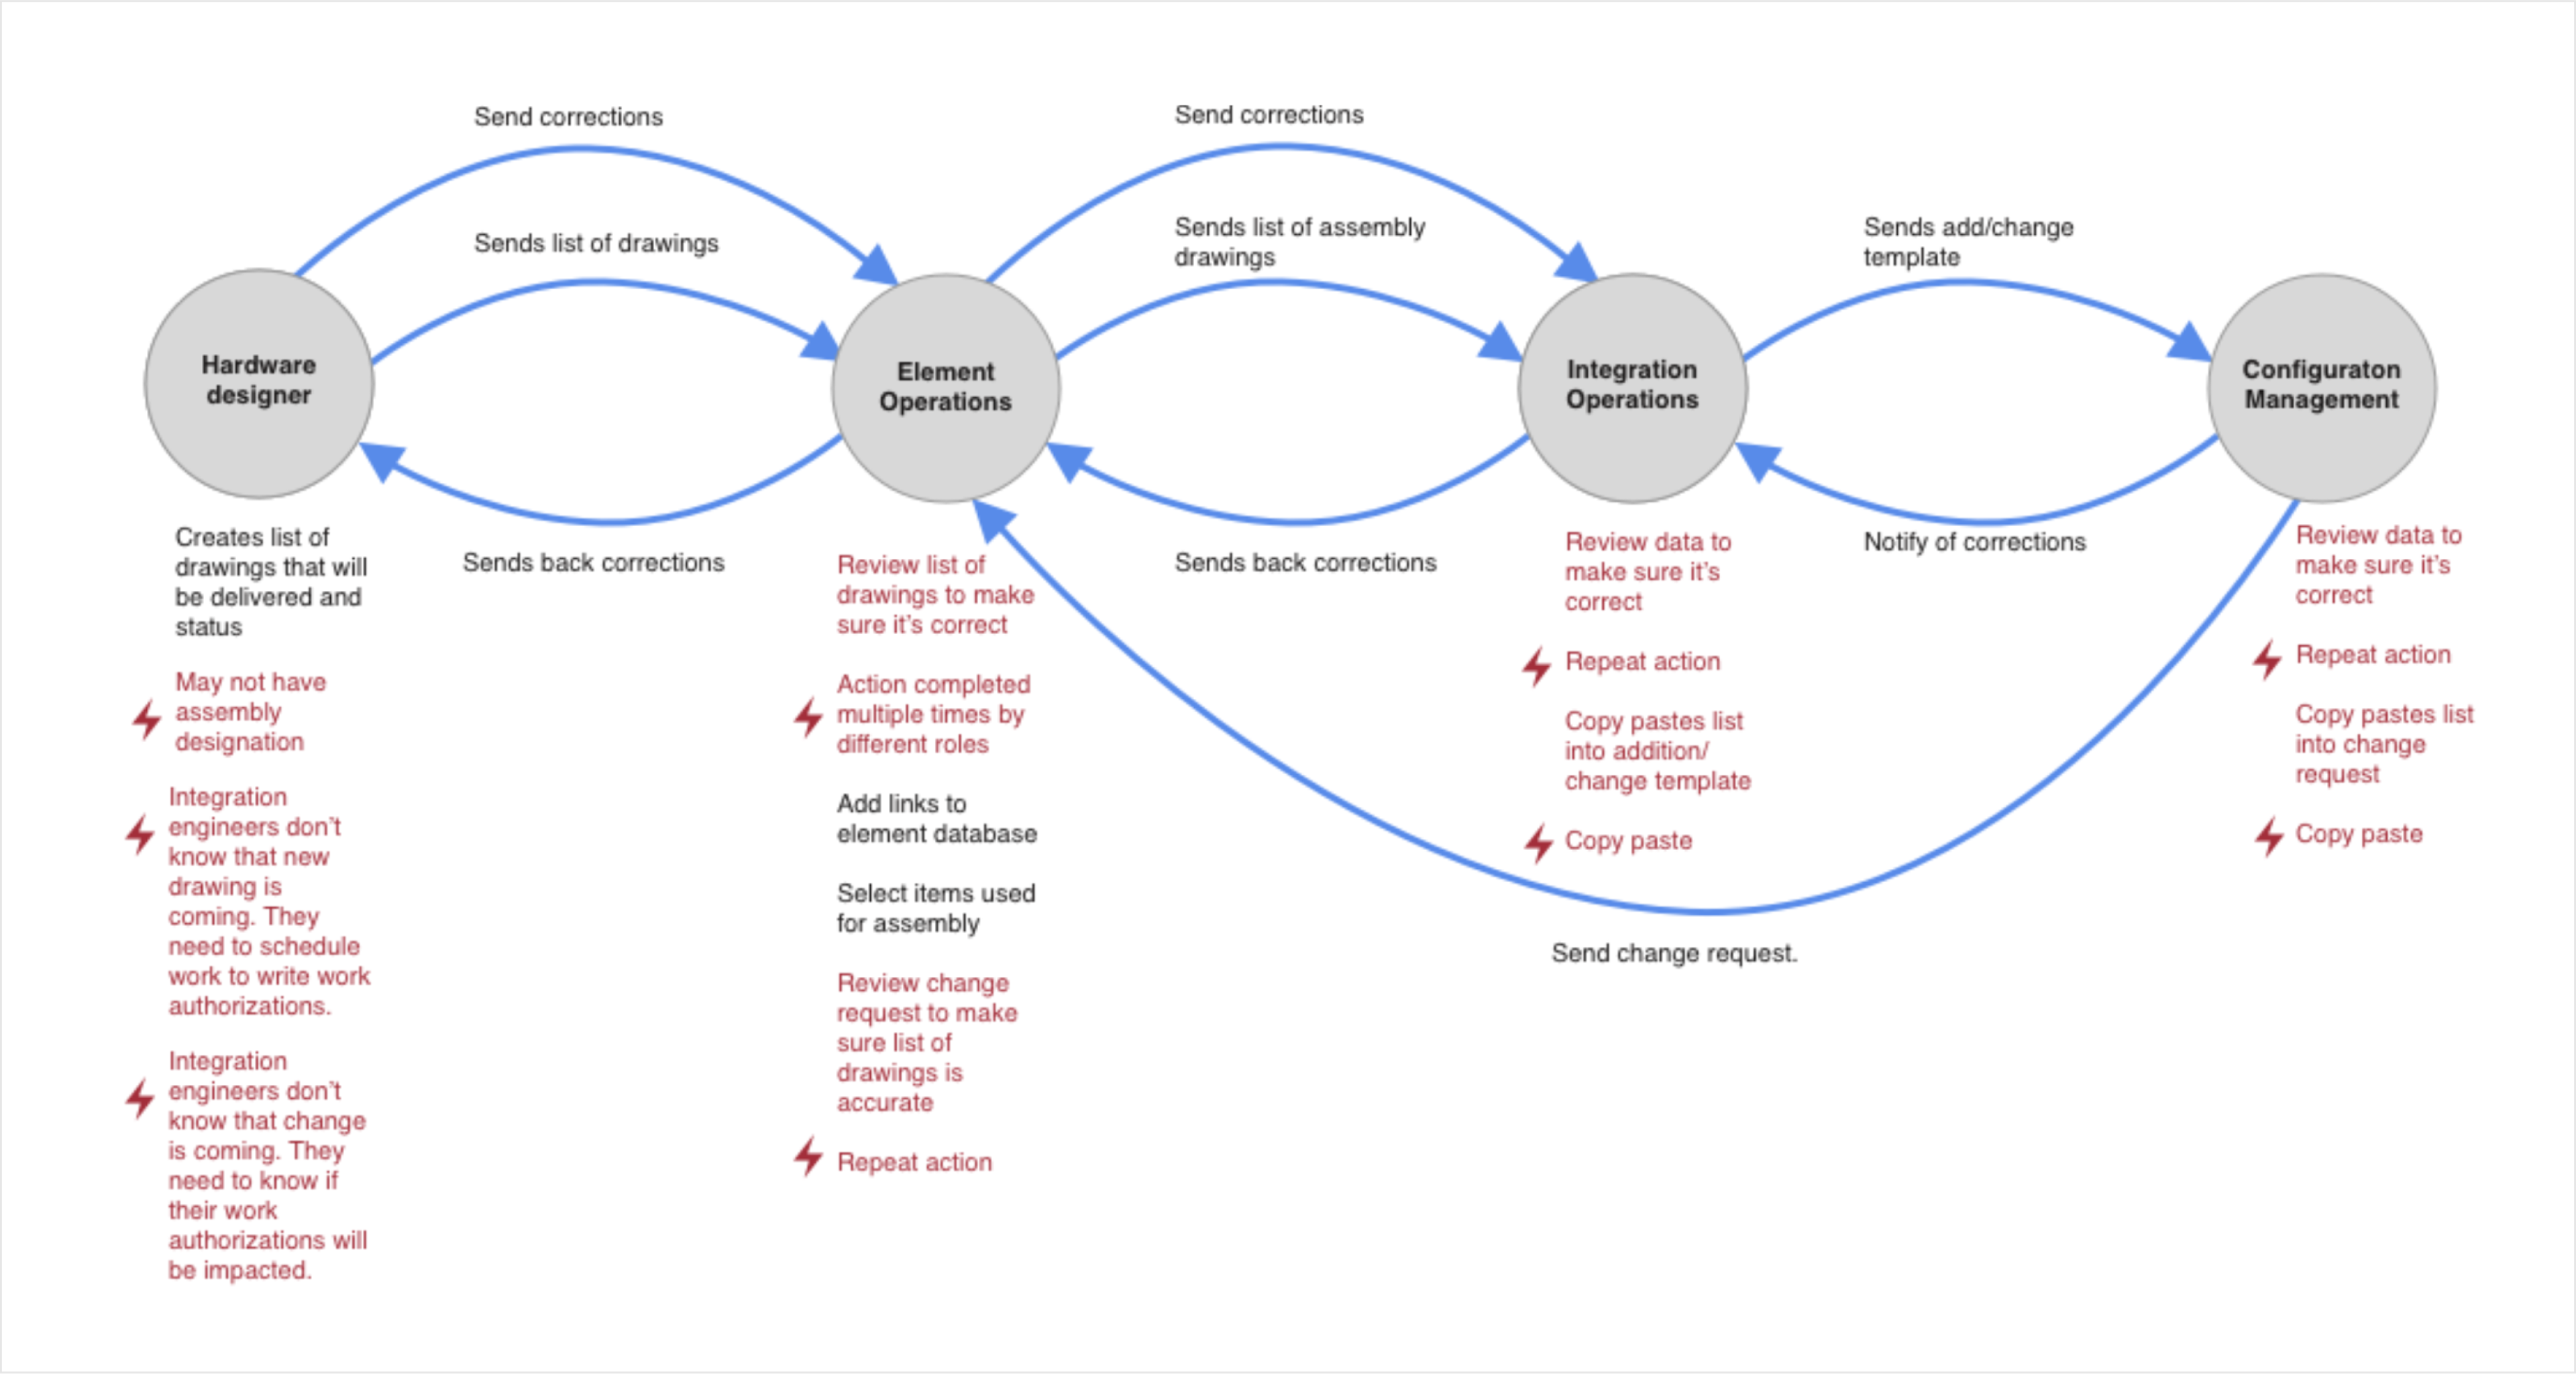 We integrated all of our drawings into a consolidated workflow model. Pain points are listed in red.